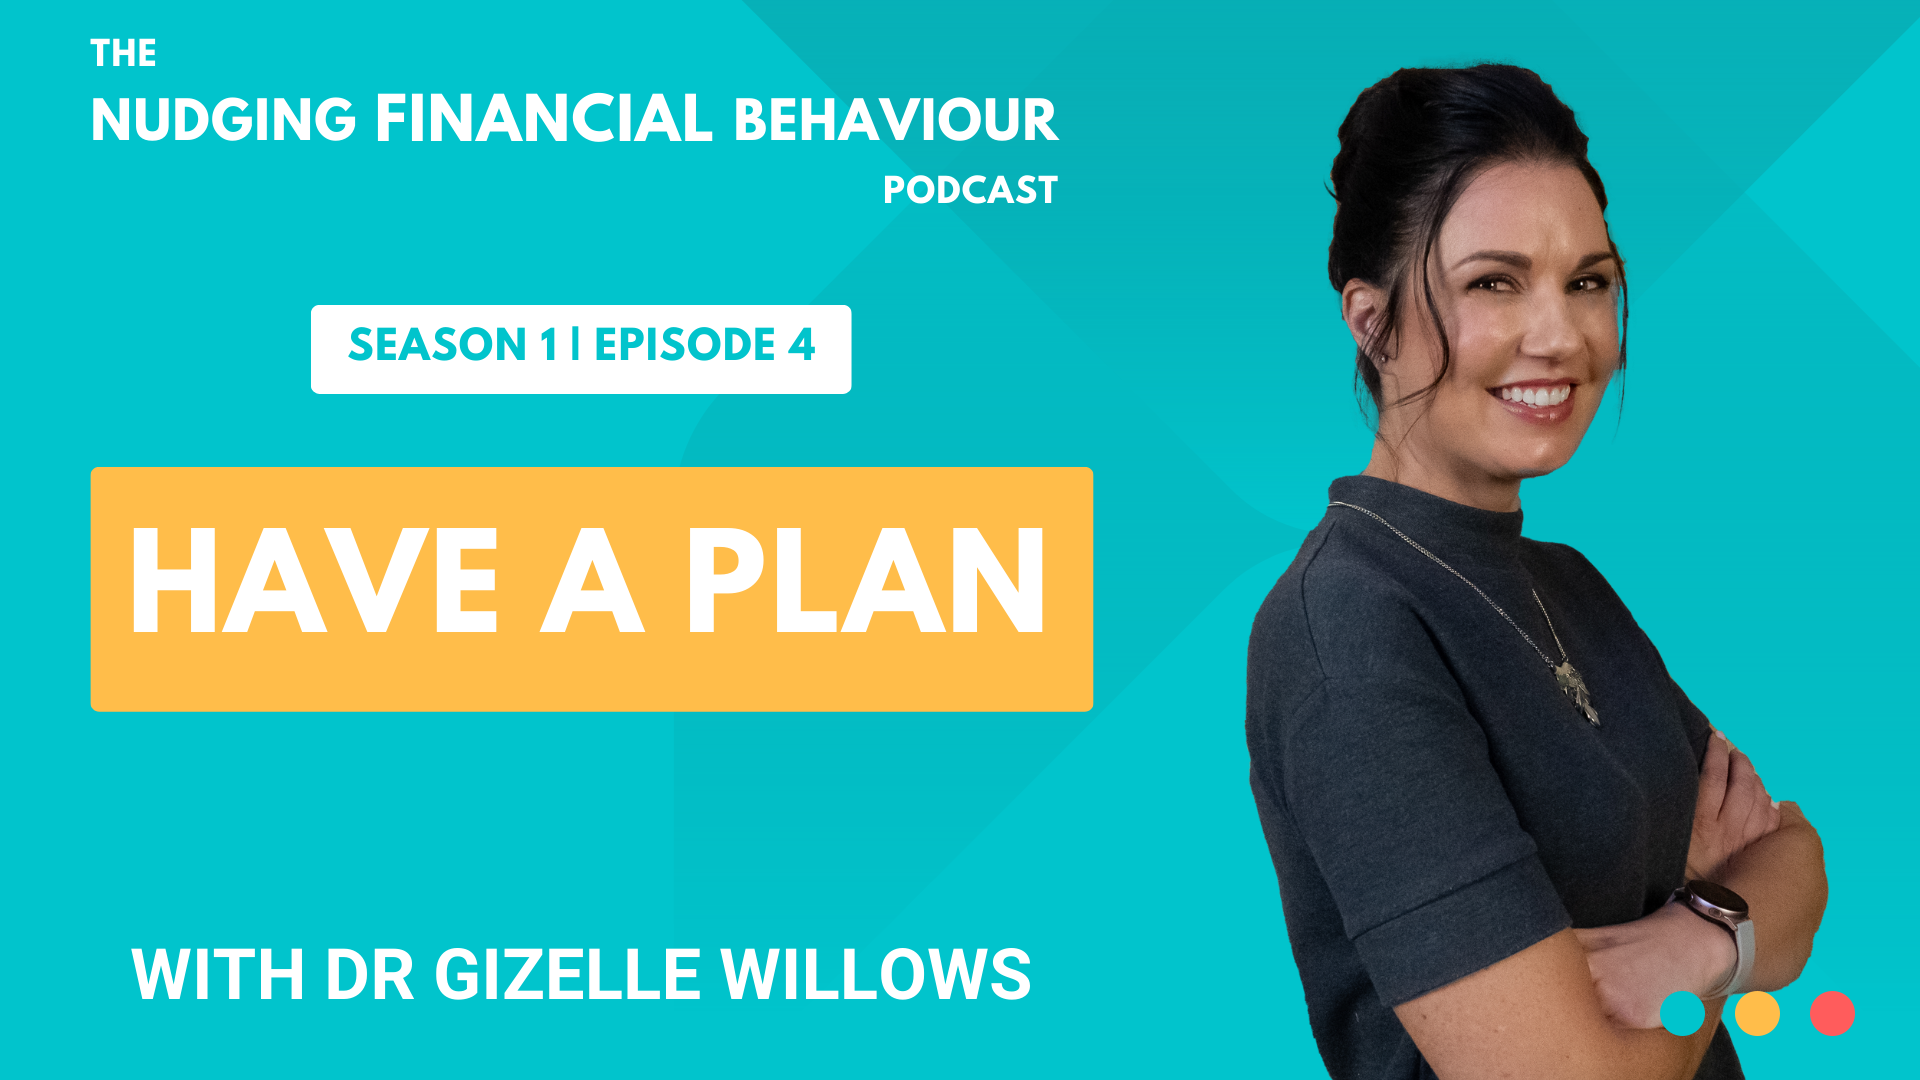 Have a plan on the Nudging Financial Behaviour podcast